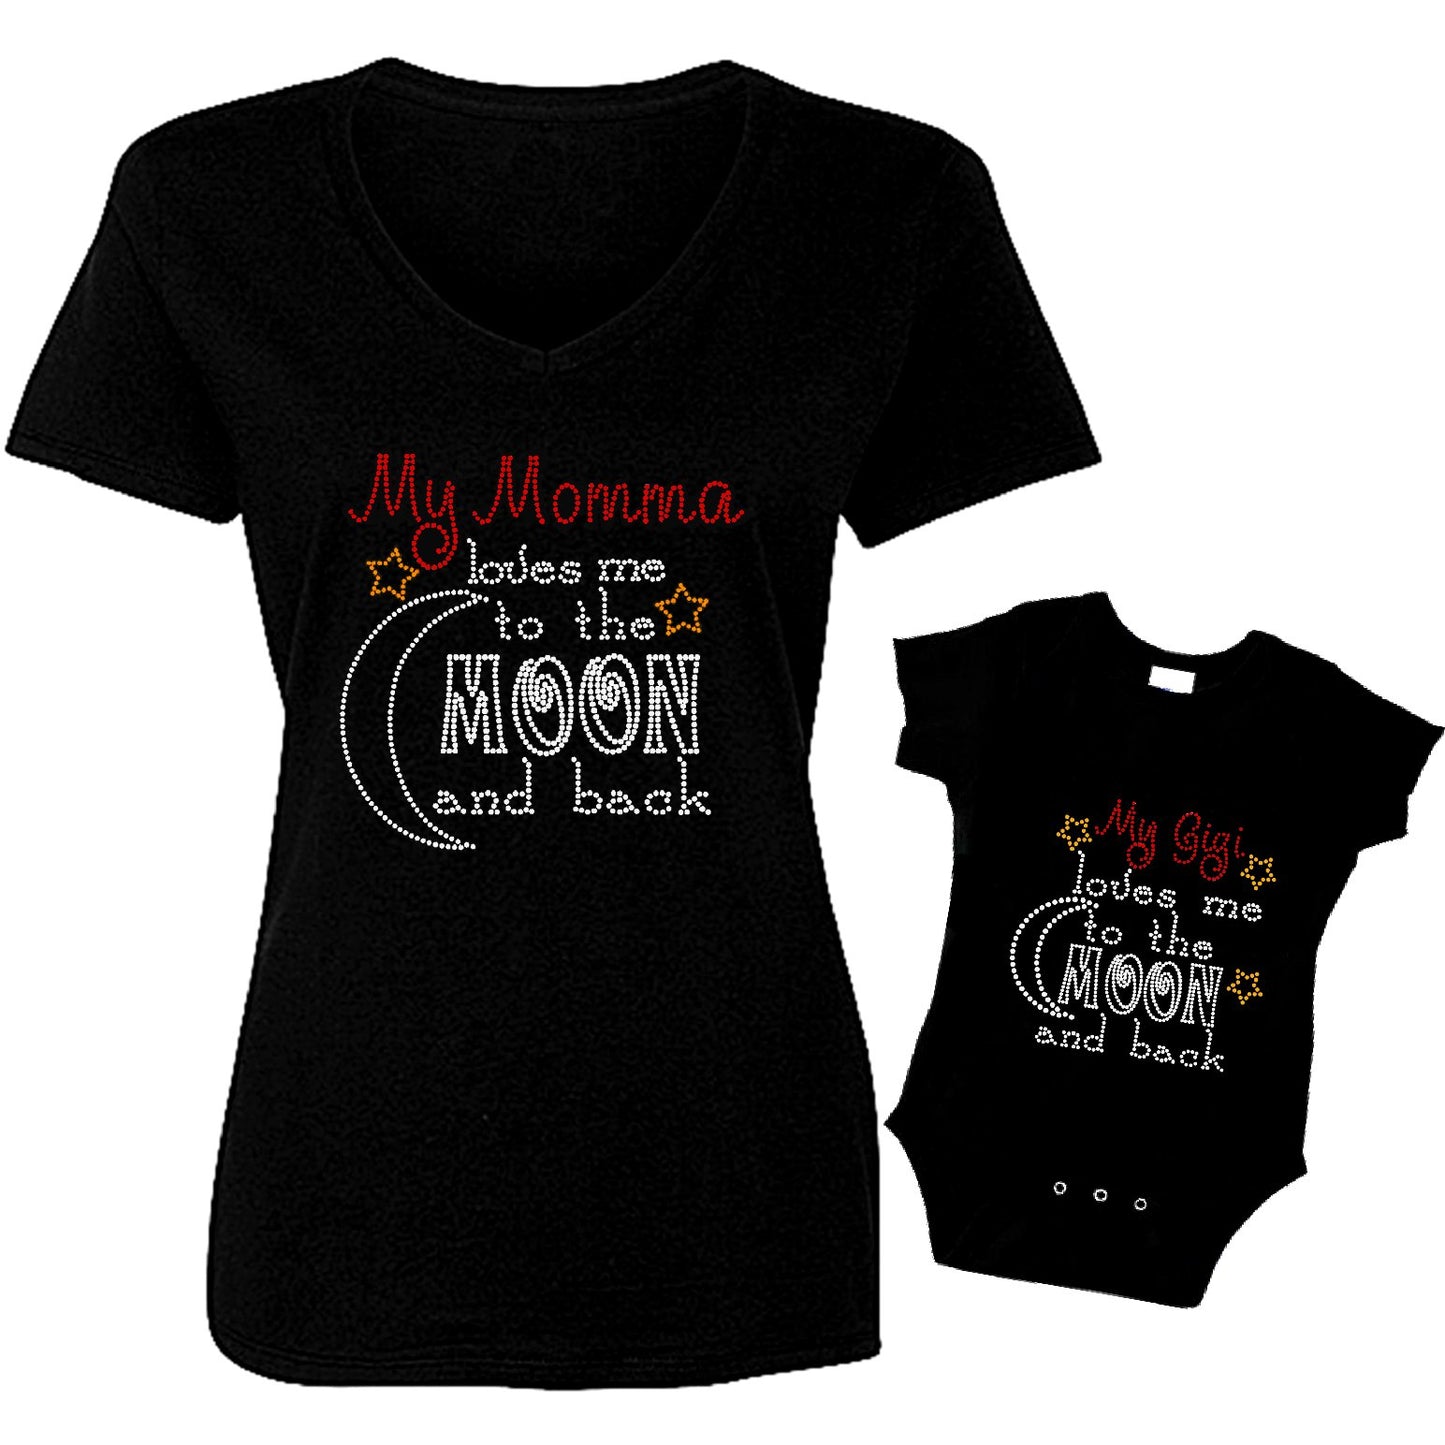 Loves Me to Moon and Back Mom and Baby T-Shirt Set